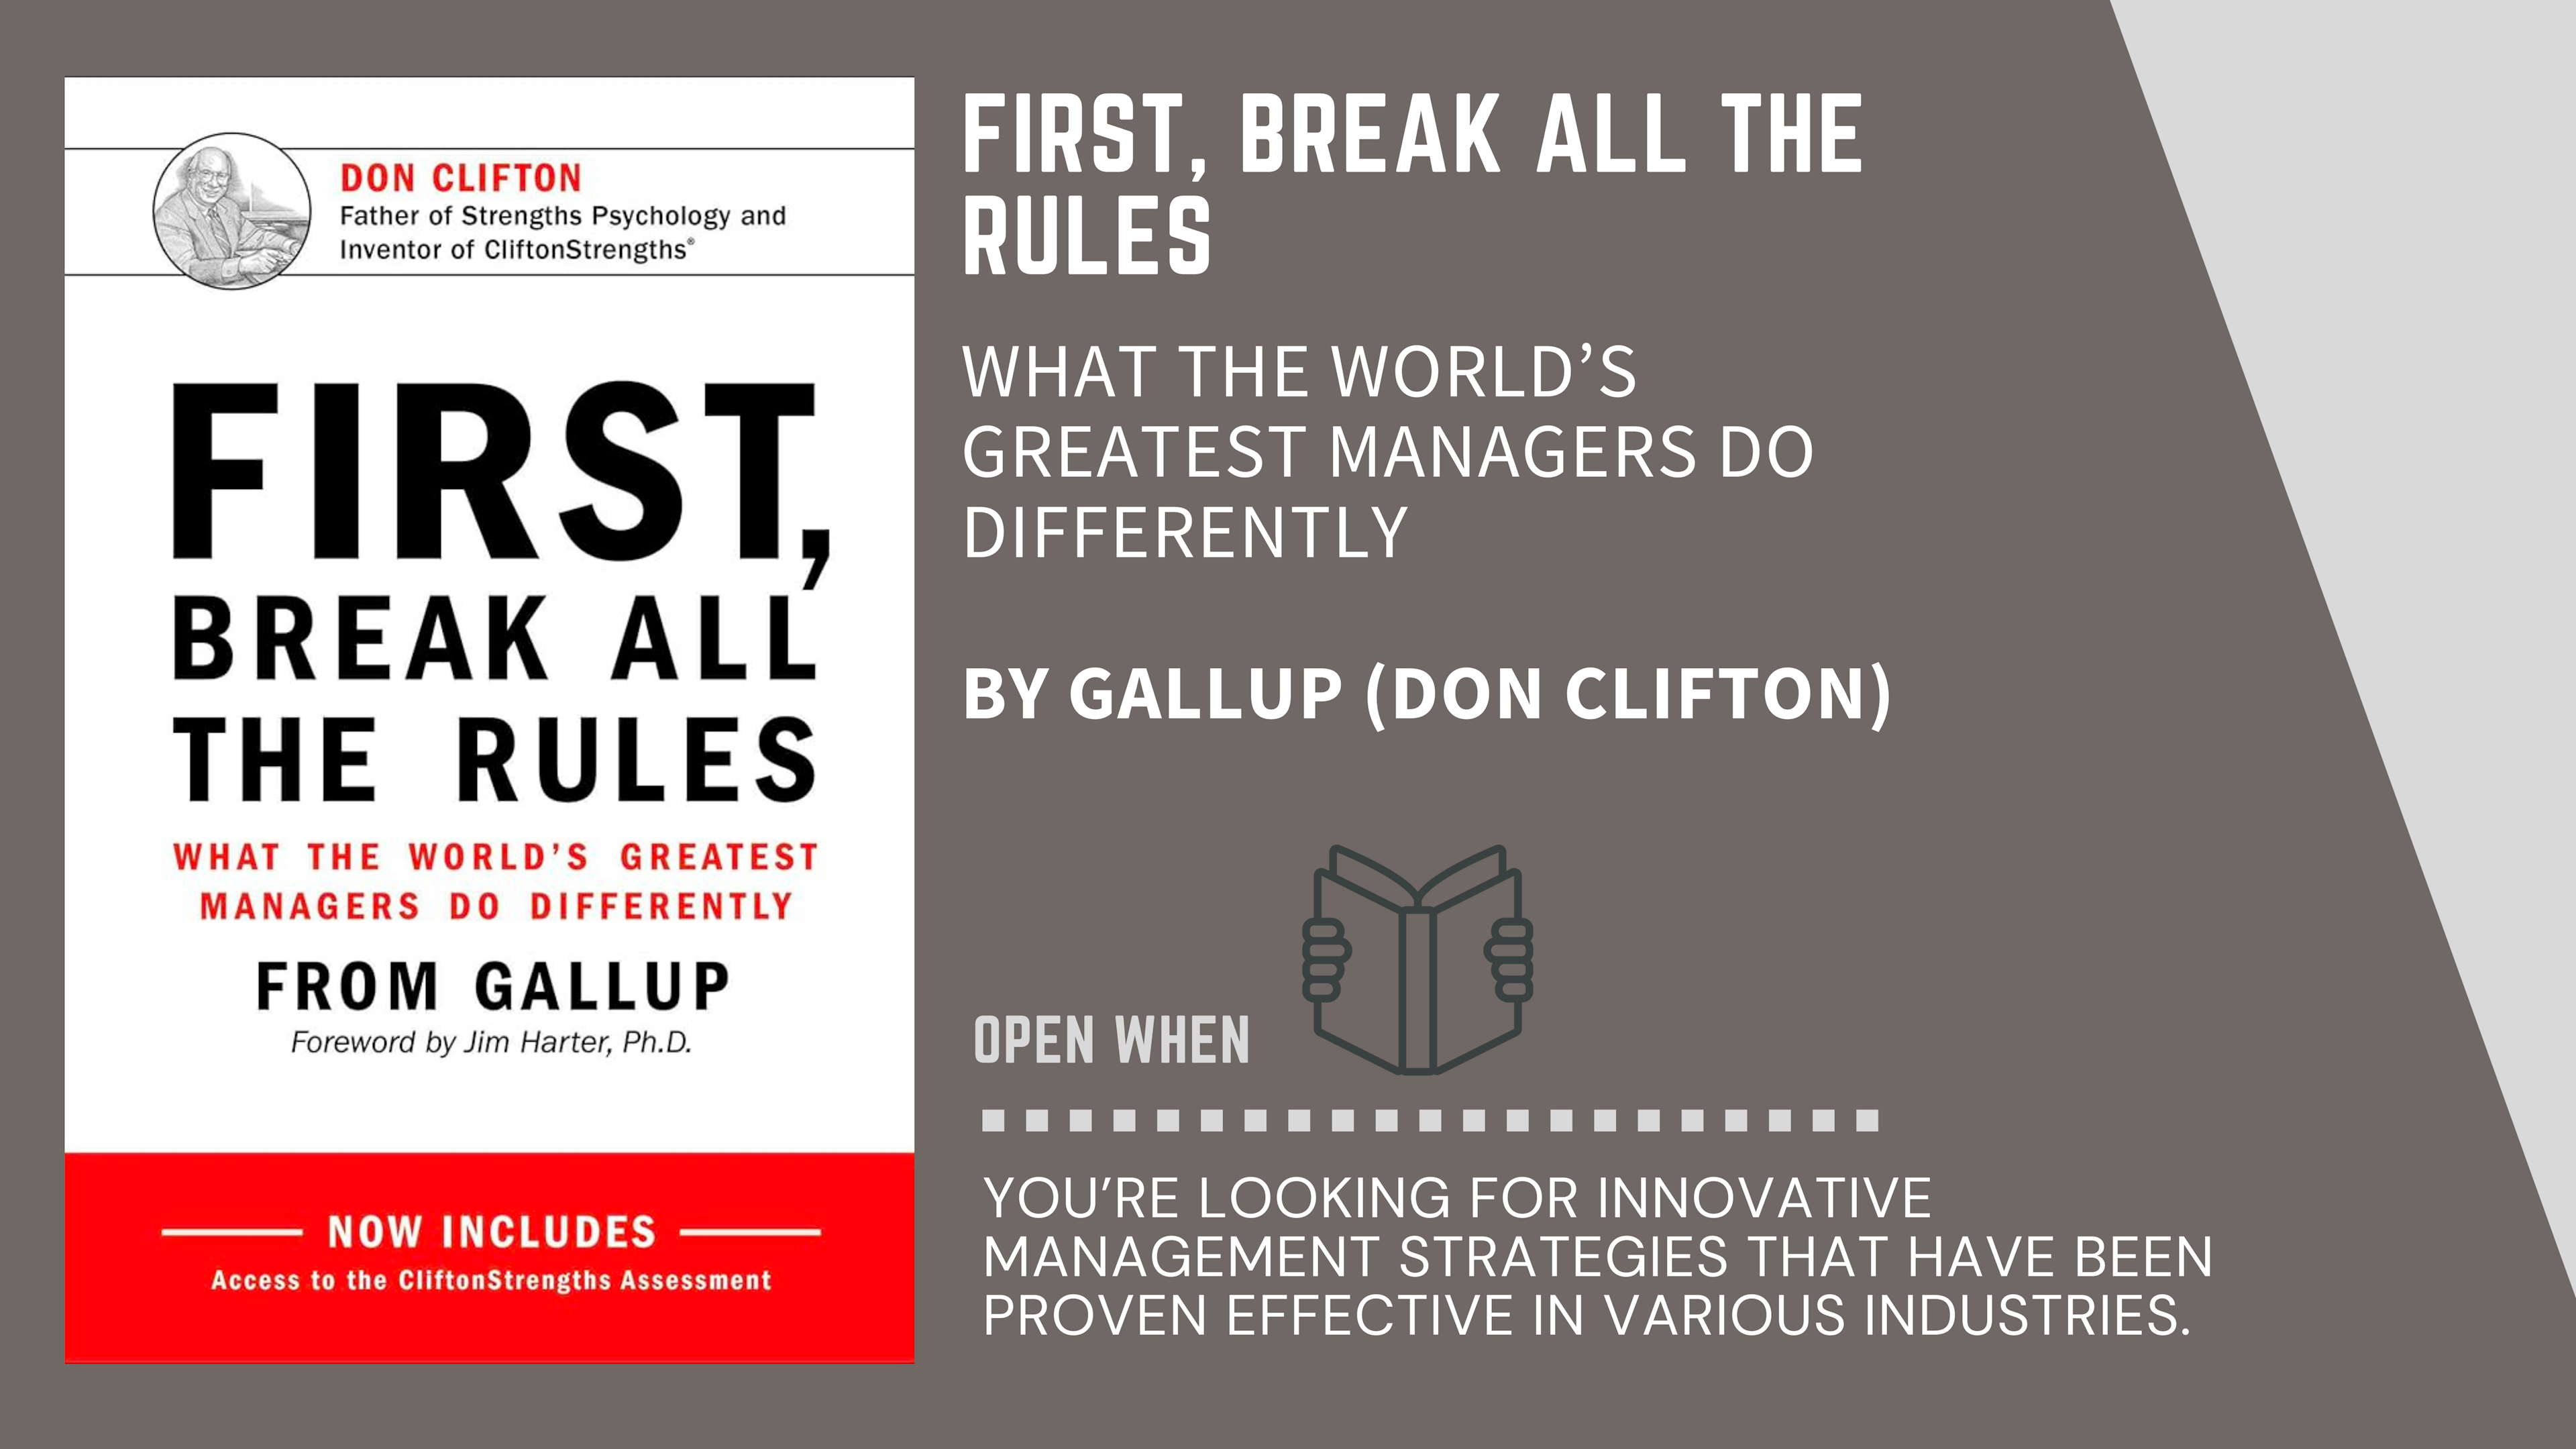 Book Cover of "First, Break All The Rules" by Gallup